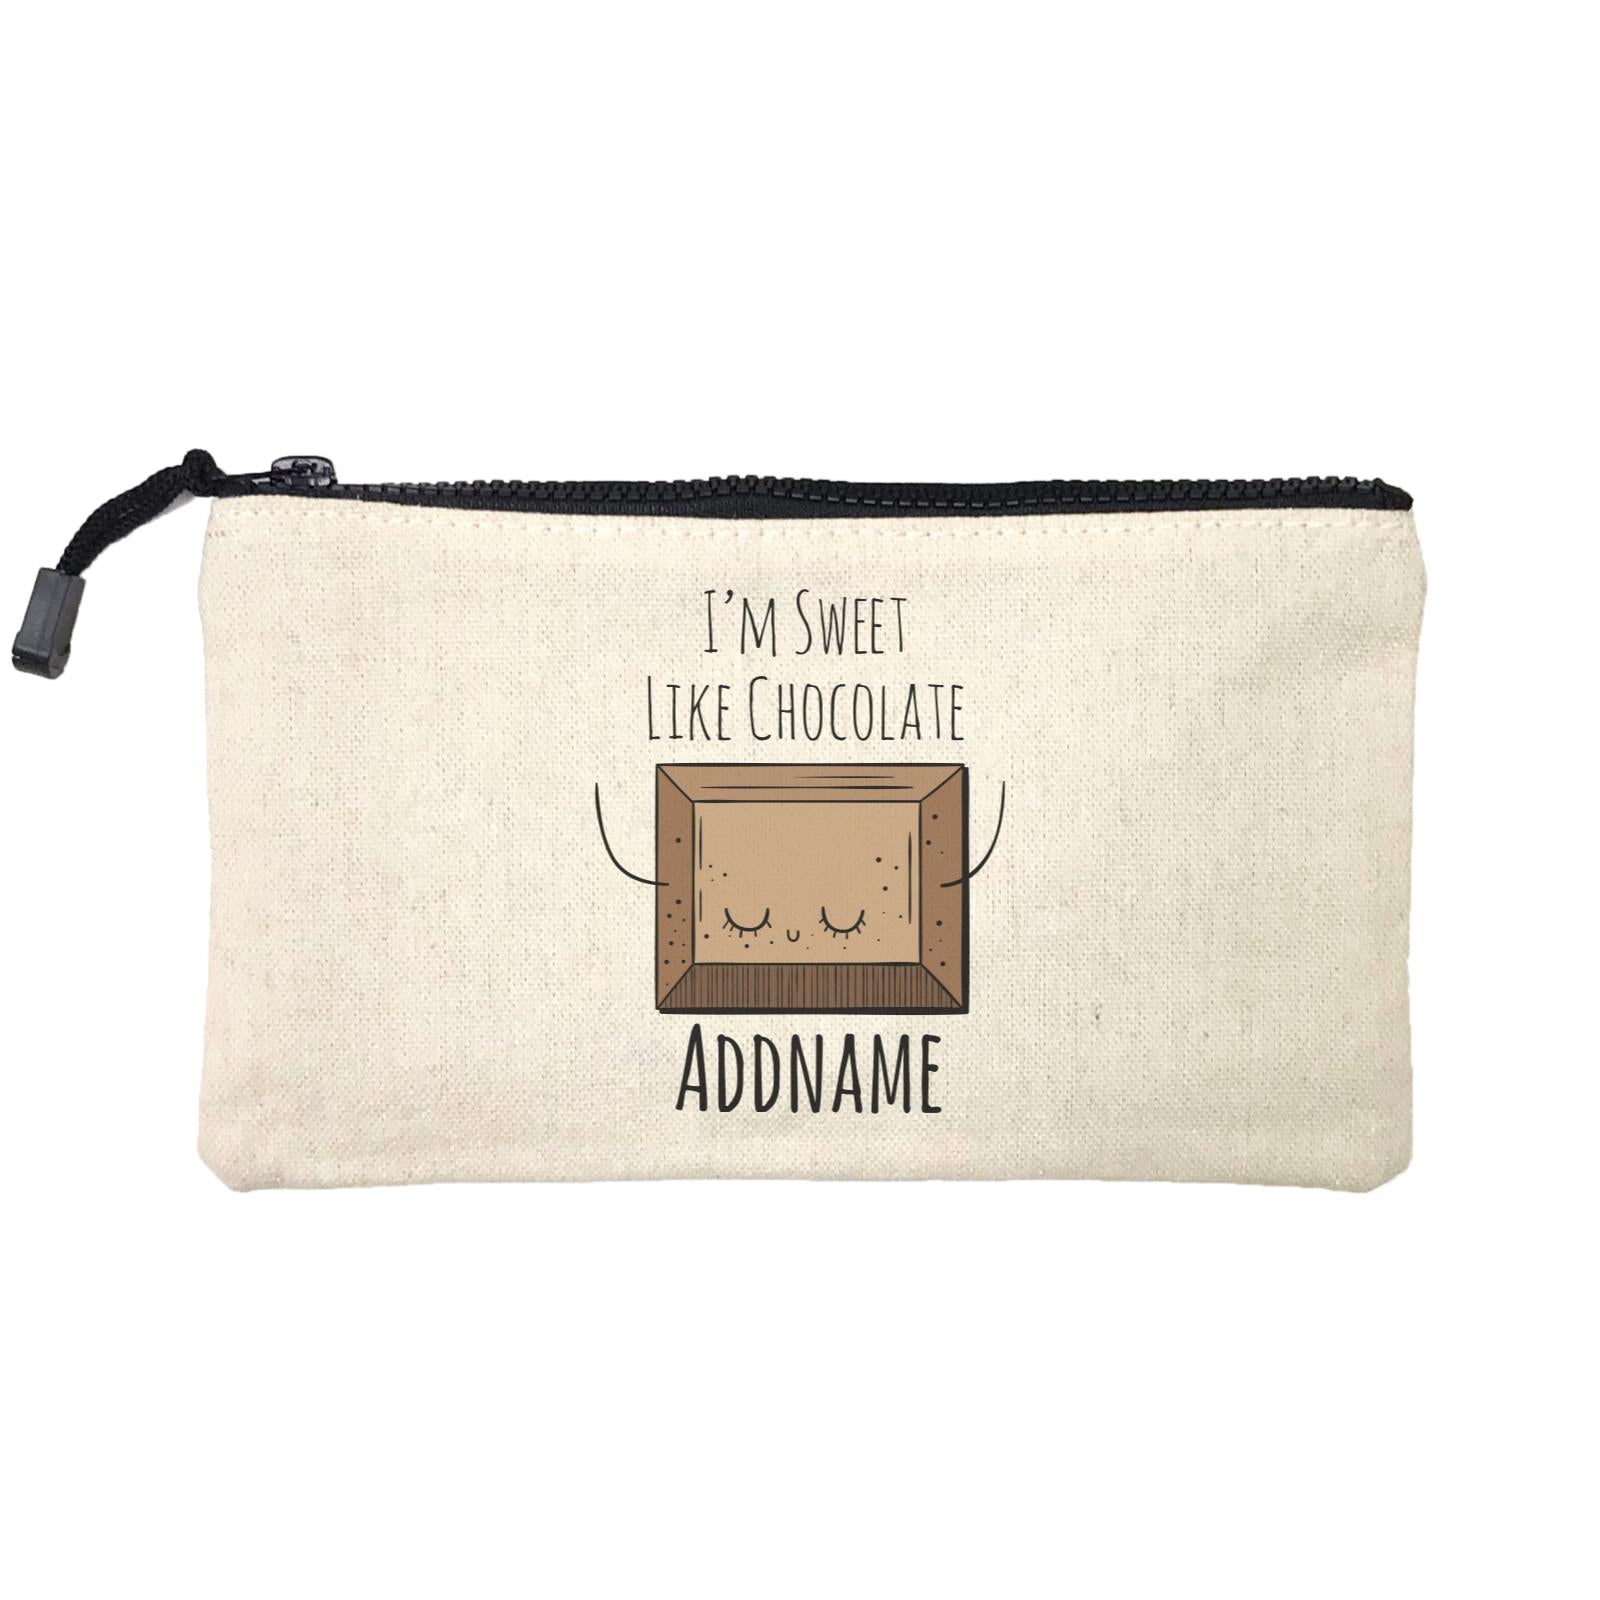 Drawn Sweet Snacks I'm Sweet Like Chocolate Addname Mini Accessories Stationery Pouch